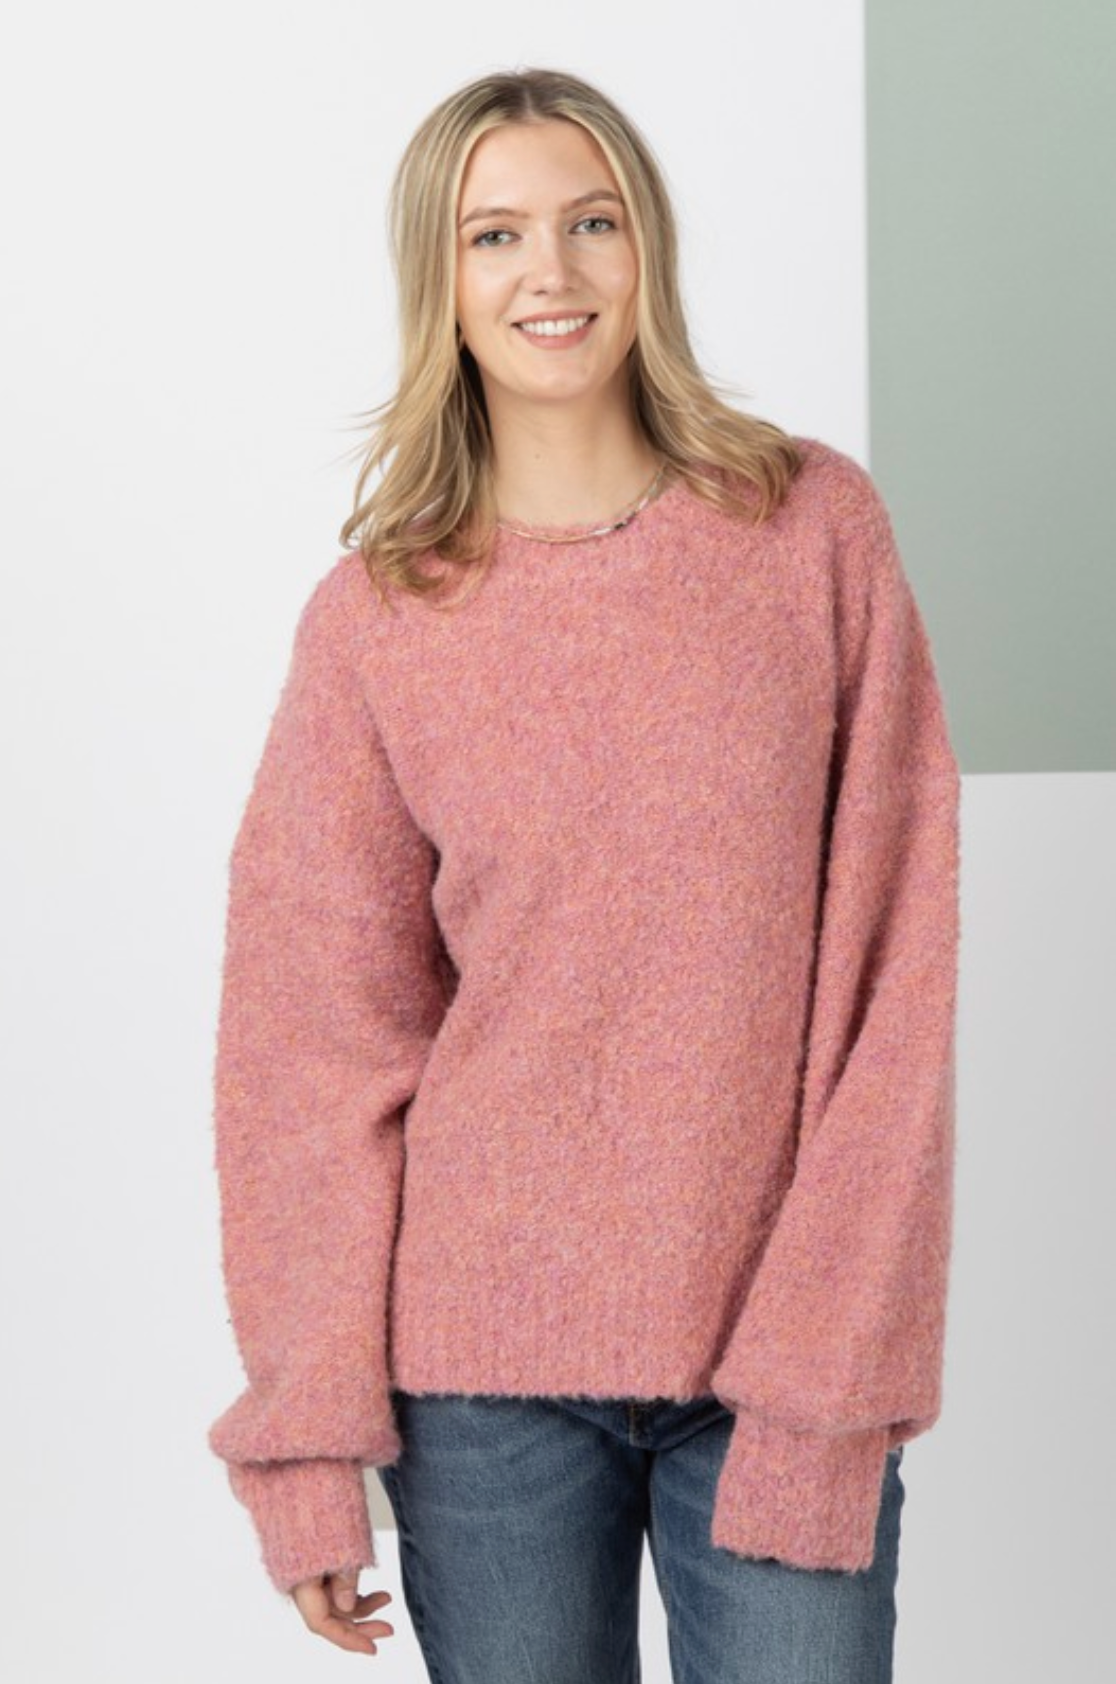 Warm And Fuzzy Knit Sweater Top